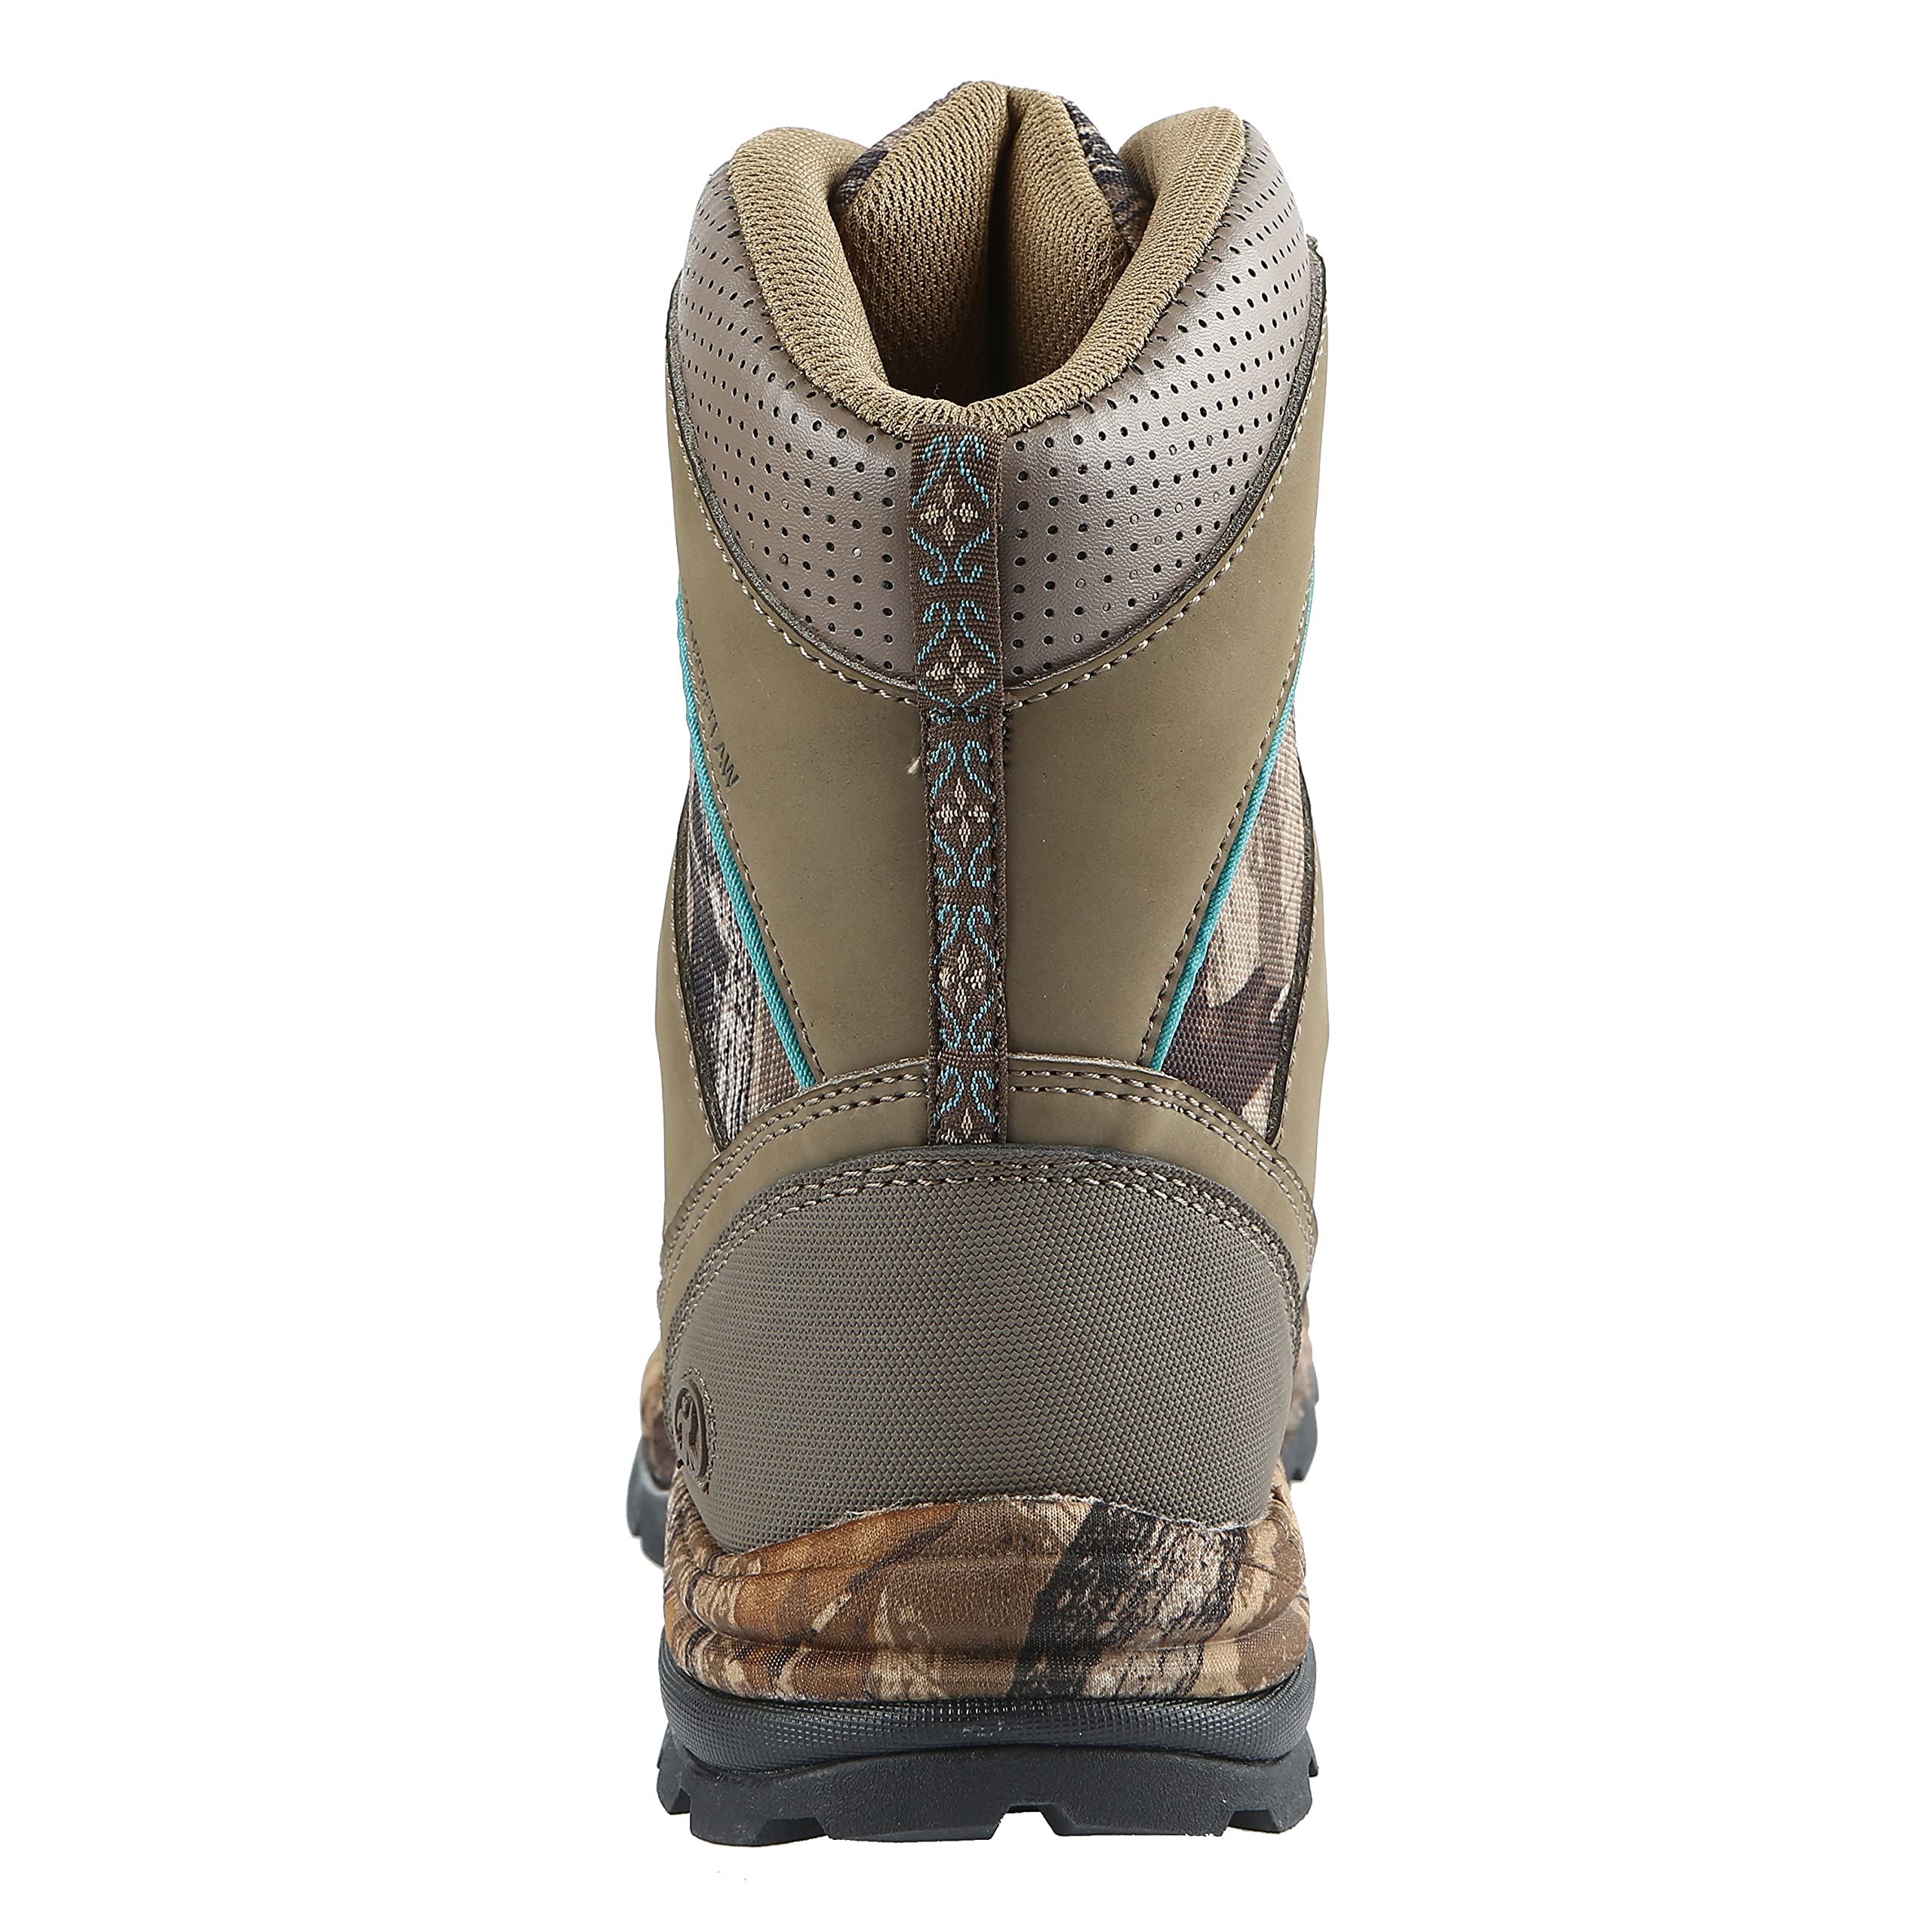 Northside Women's Woodbury 800 Hunting Shoes